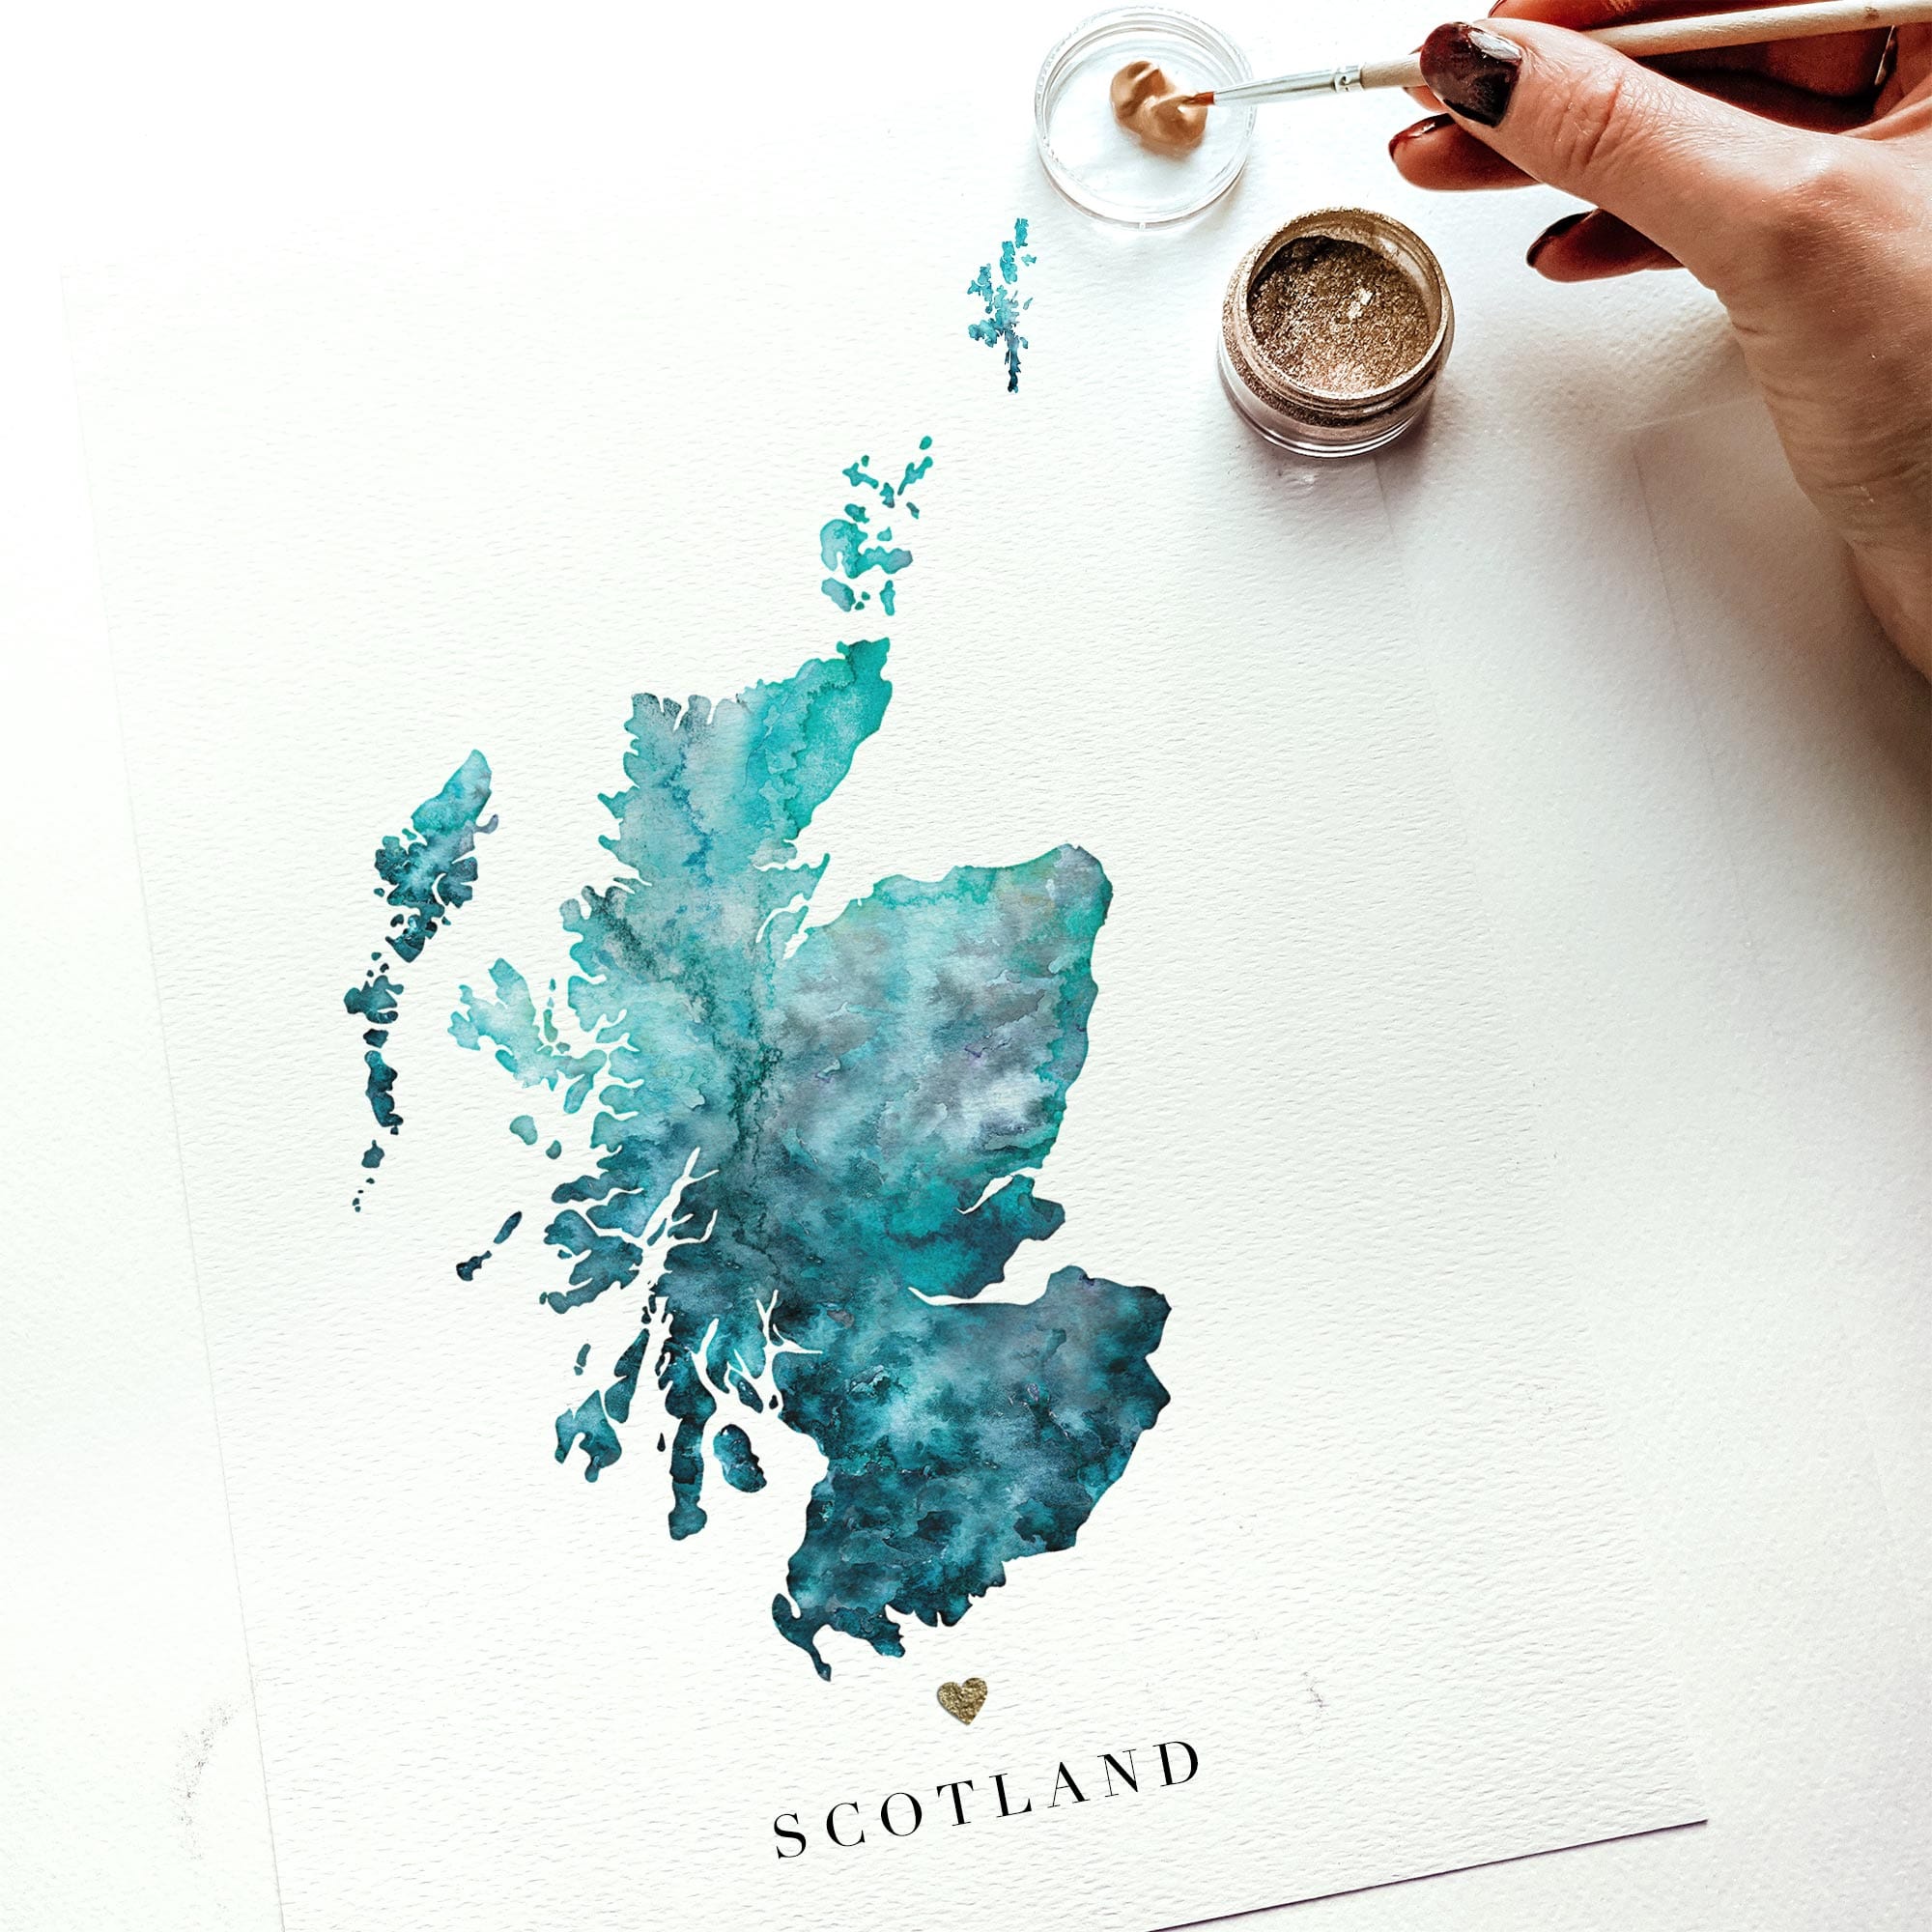 EJayDesign Scottish Prints A3 Unframed Giclée / Turqouise Scotland Watercolour Gold Map Giclee Print